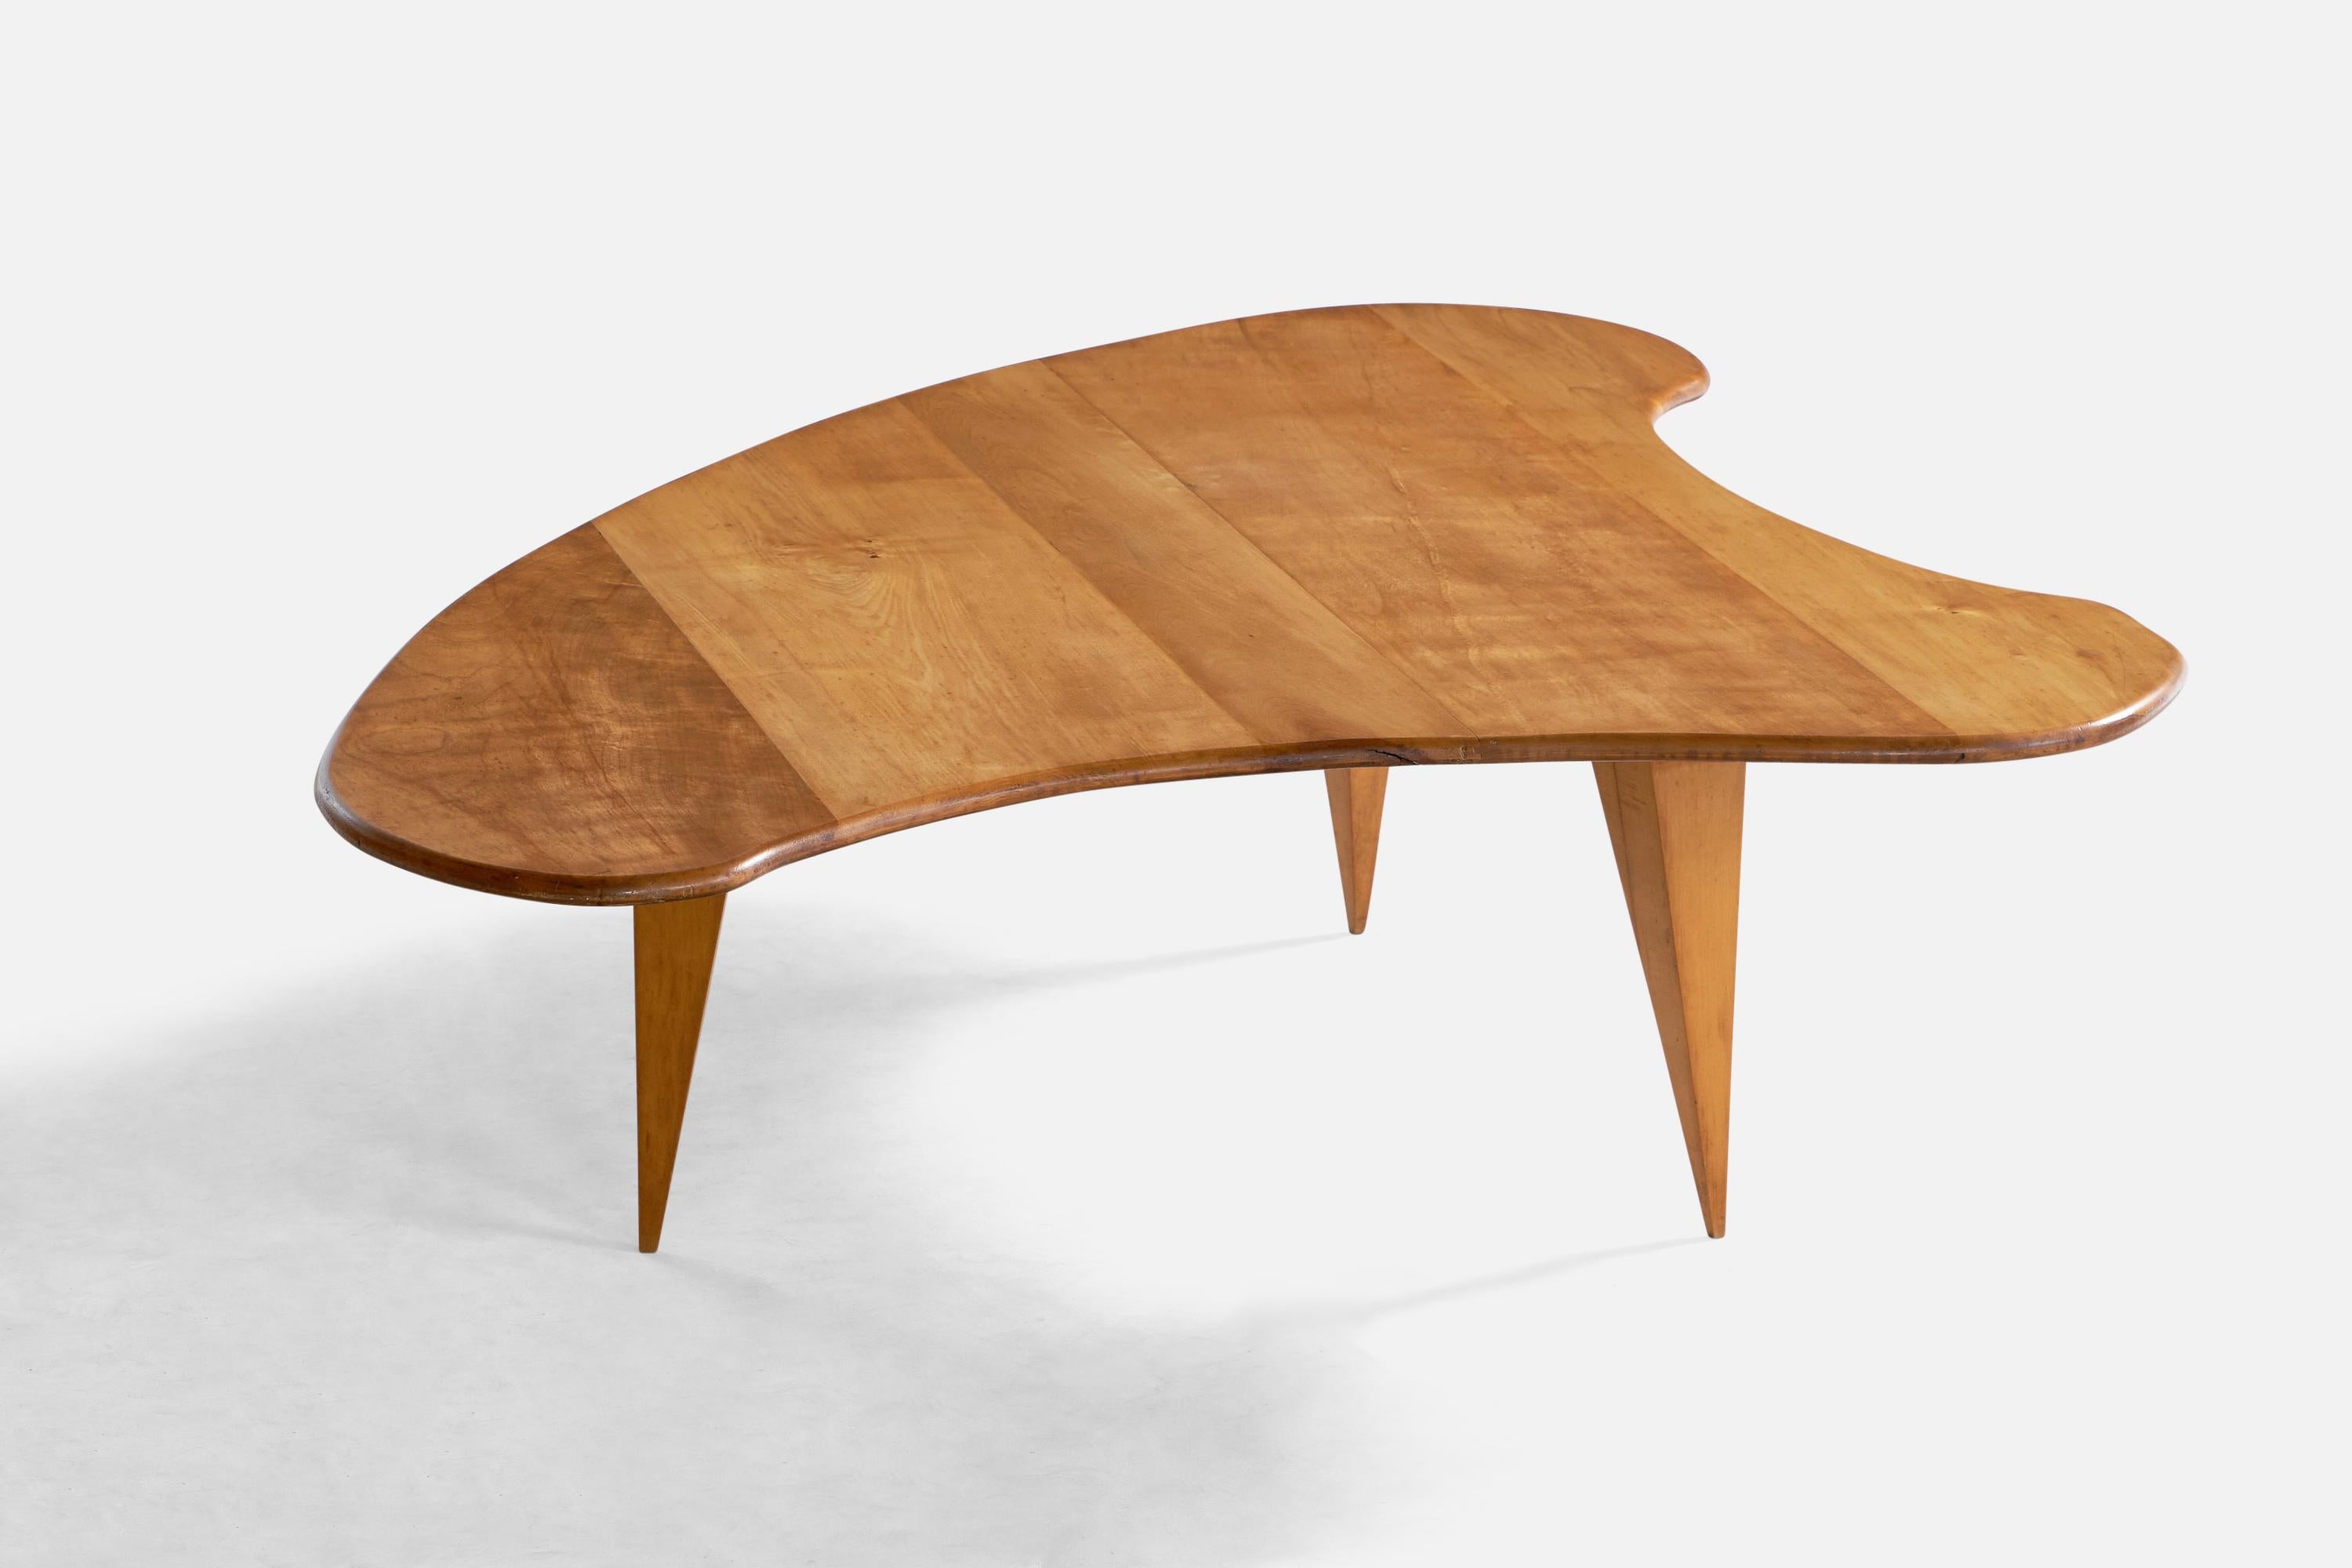 A freeform maple coffee table designed and produced in the US, c. 1950s.

